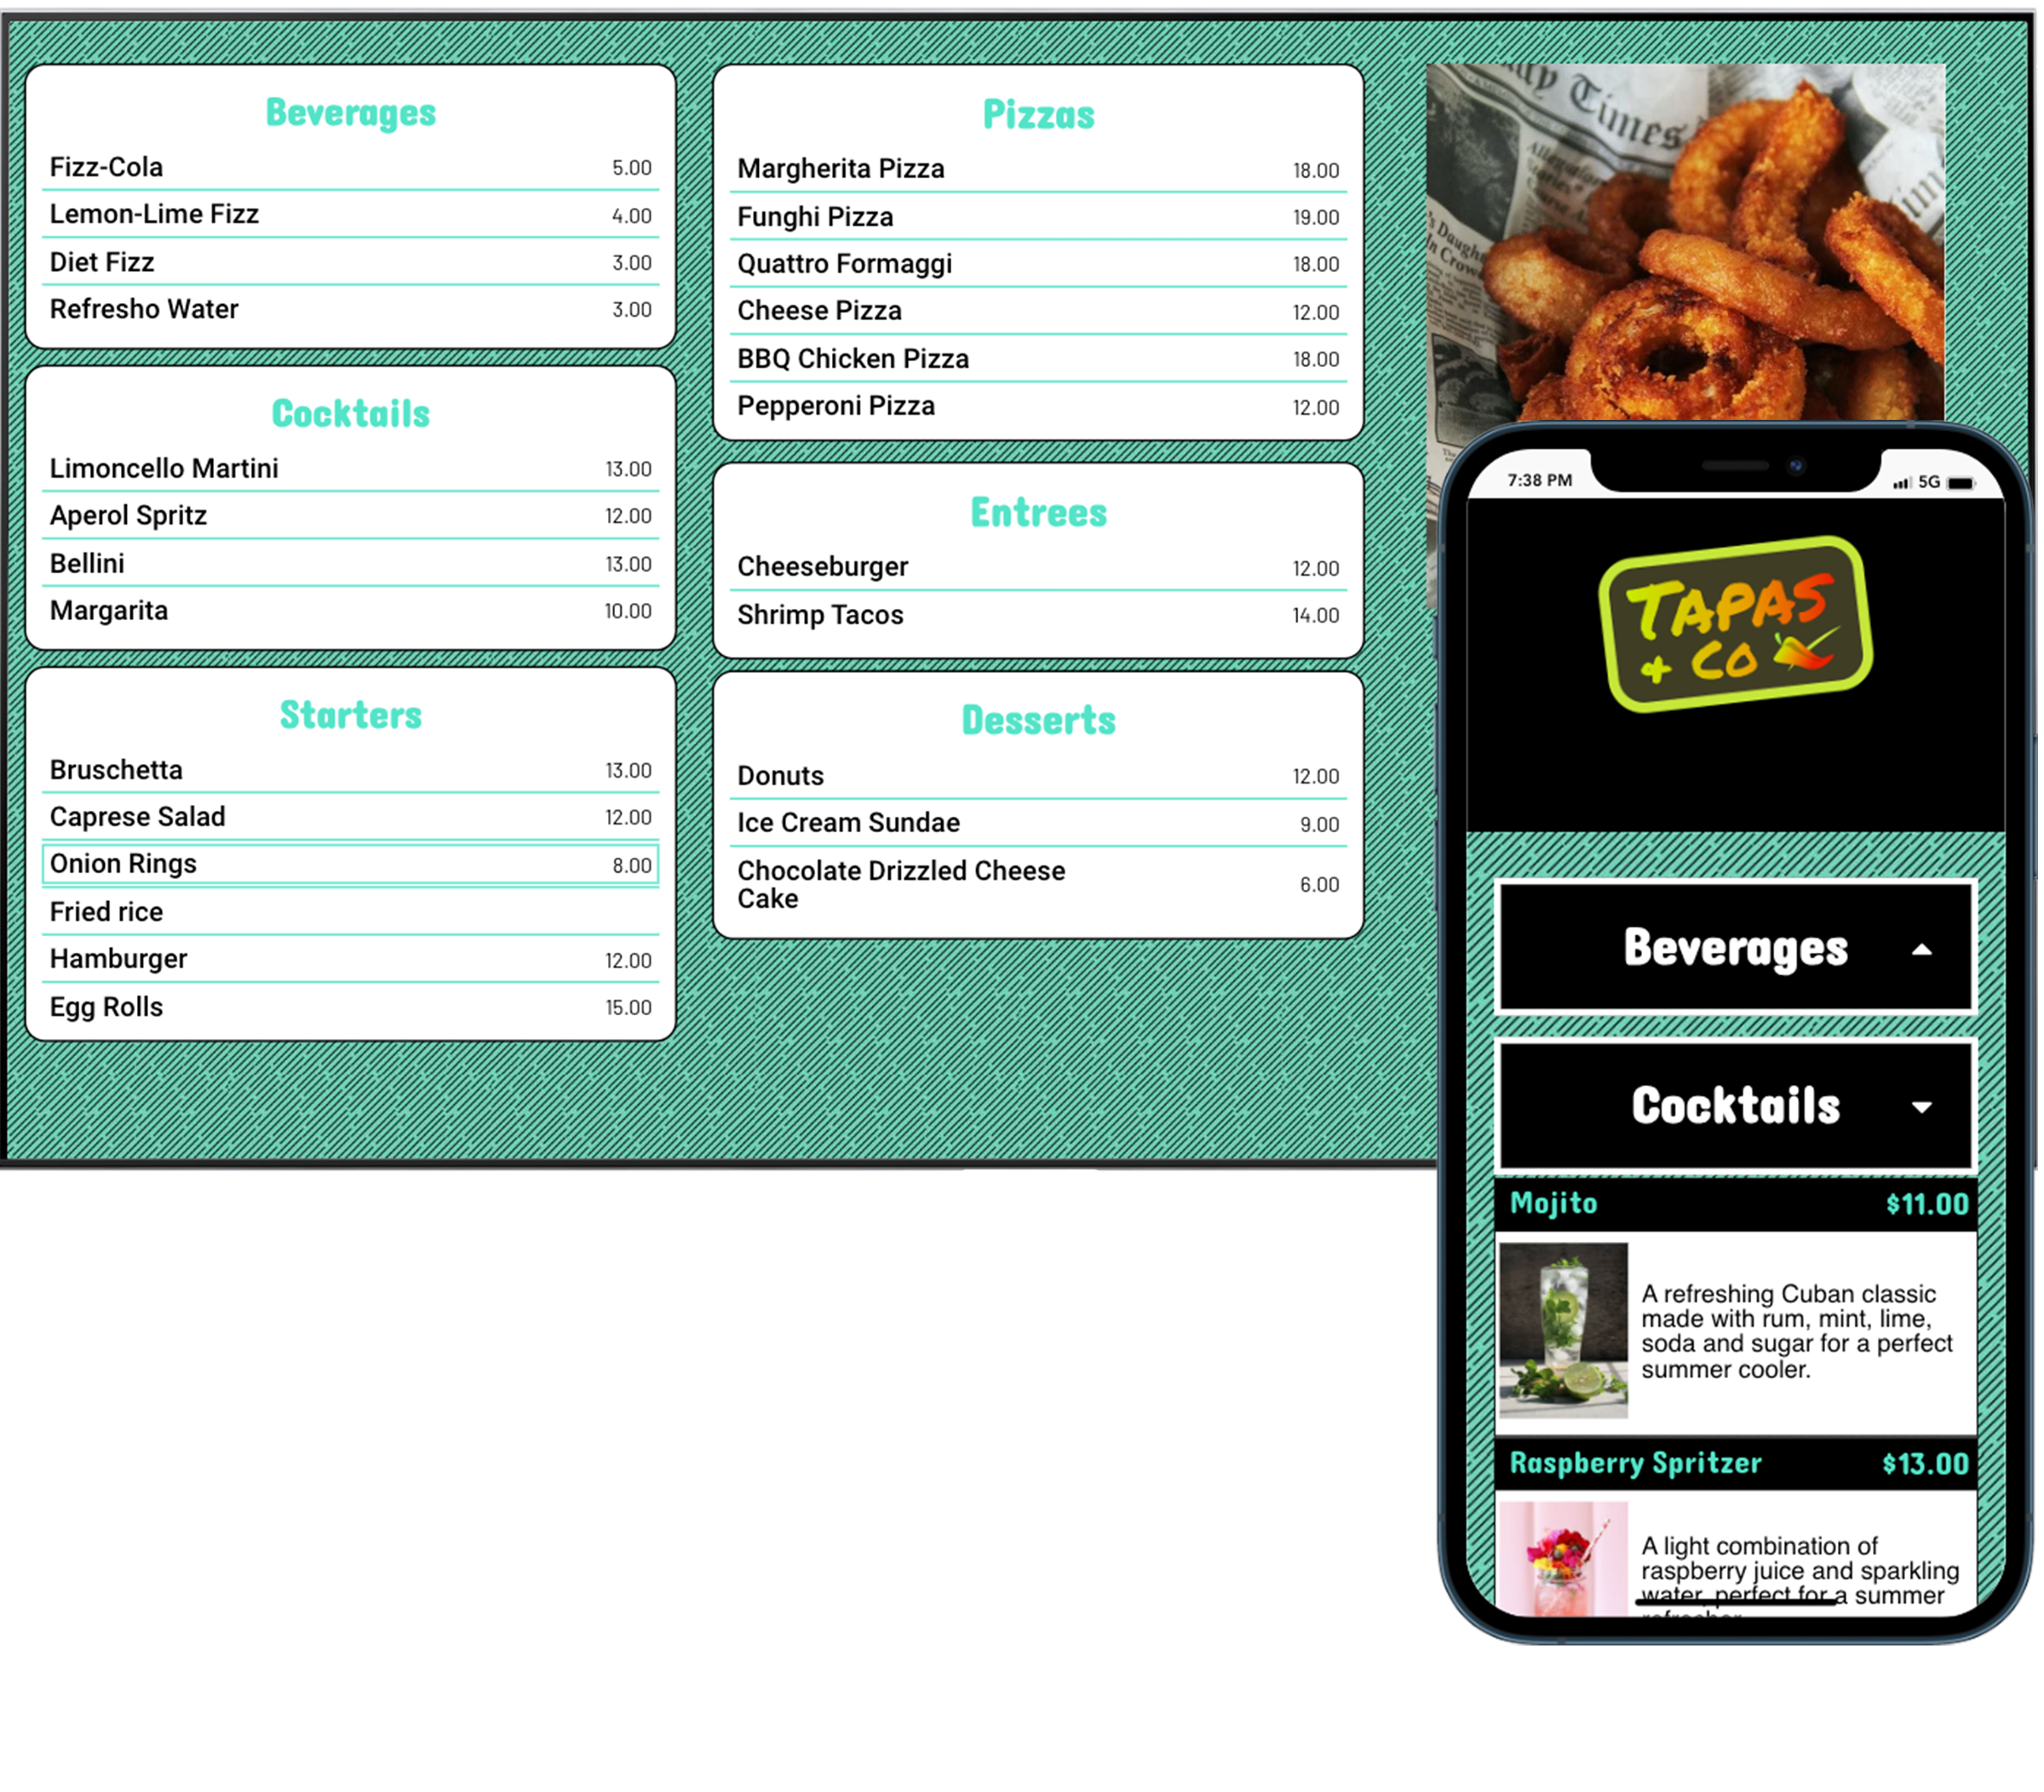 A vibrant digital menu board with a green textured background displaying categories such as Beverages, Pizzas, Cocktails, Starters, Entrées, and Desserts, with a mobile device showing detailed drink options.